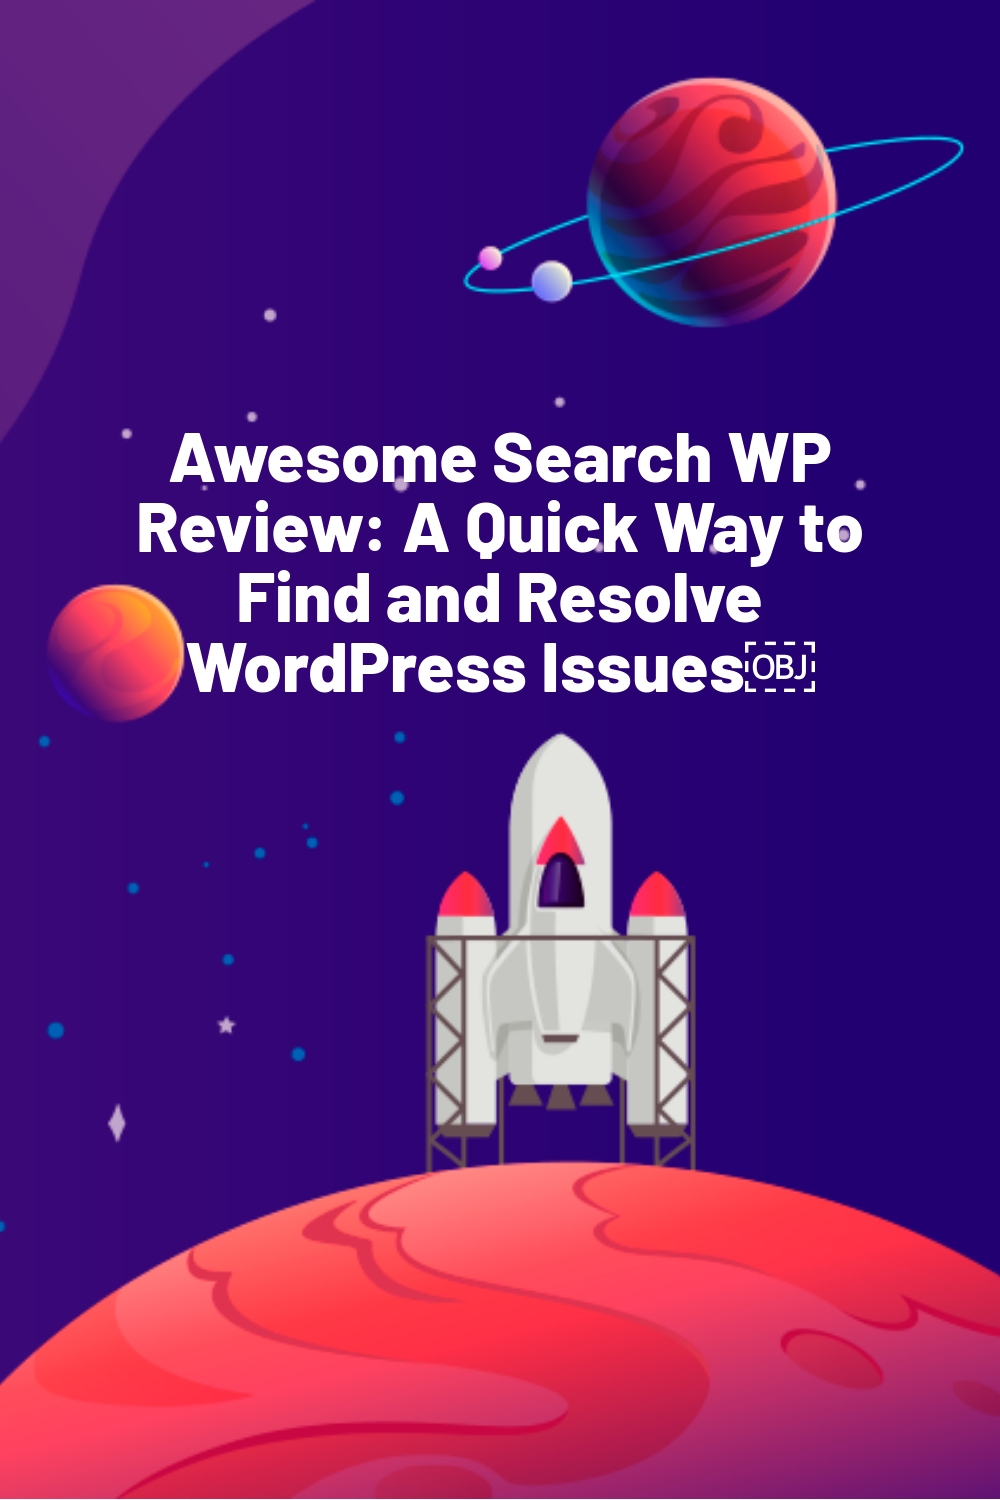 Awesome Search WP Review: A Quick Way to Find and Resolve WordPress Issues￼